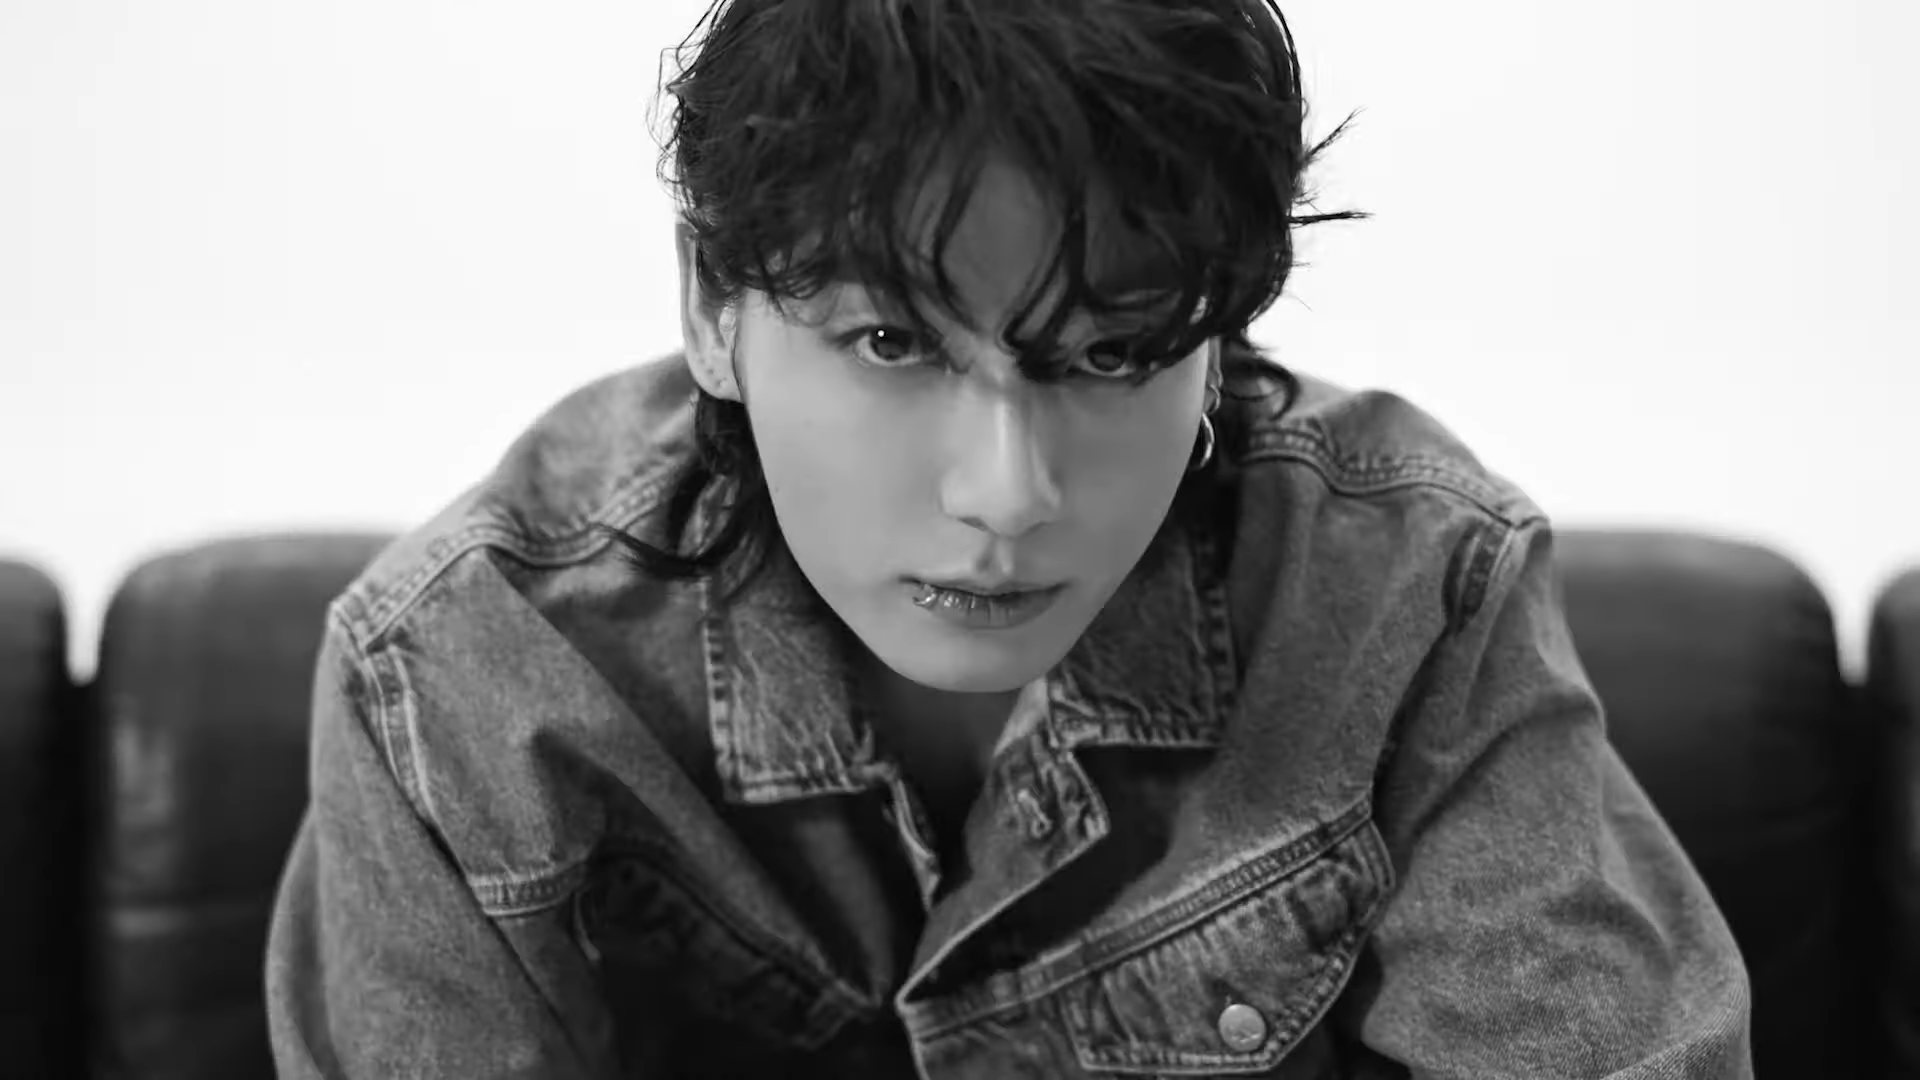 Calvin Klein continues to welcome Jungkook as new global ambassador with 'Introducing Jungkook' CF